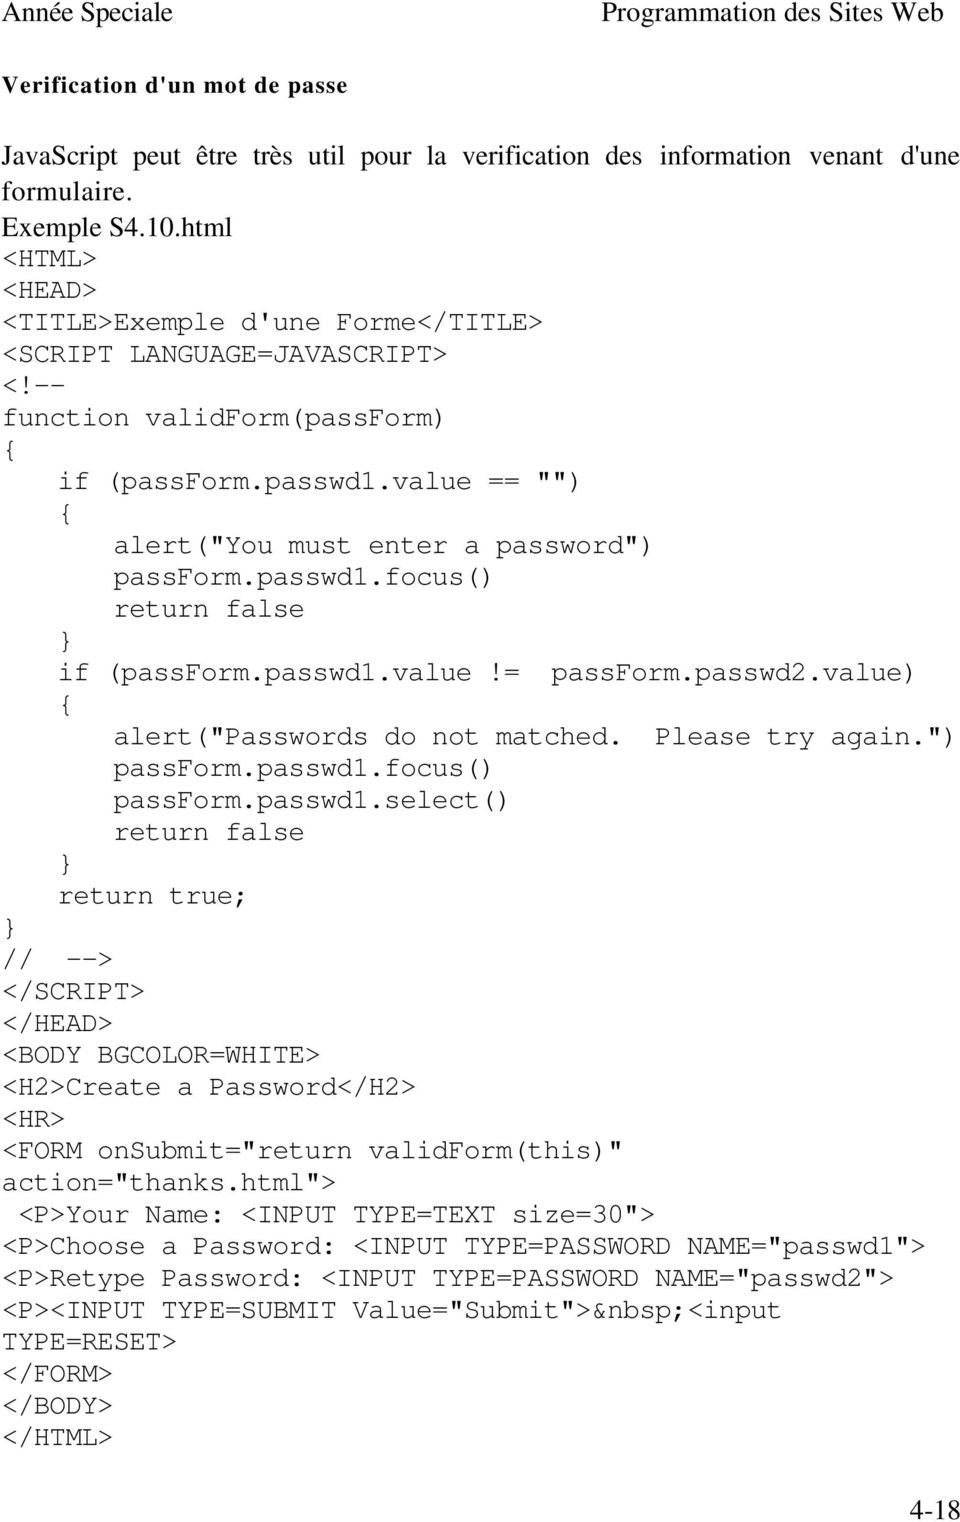 value) alert("passwords do not matched. Please try again.") passform.passwd1.